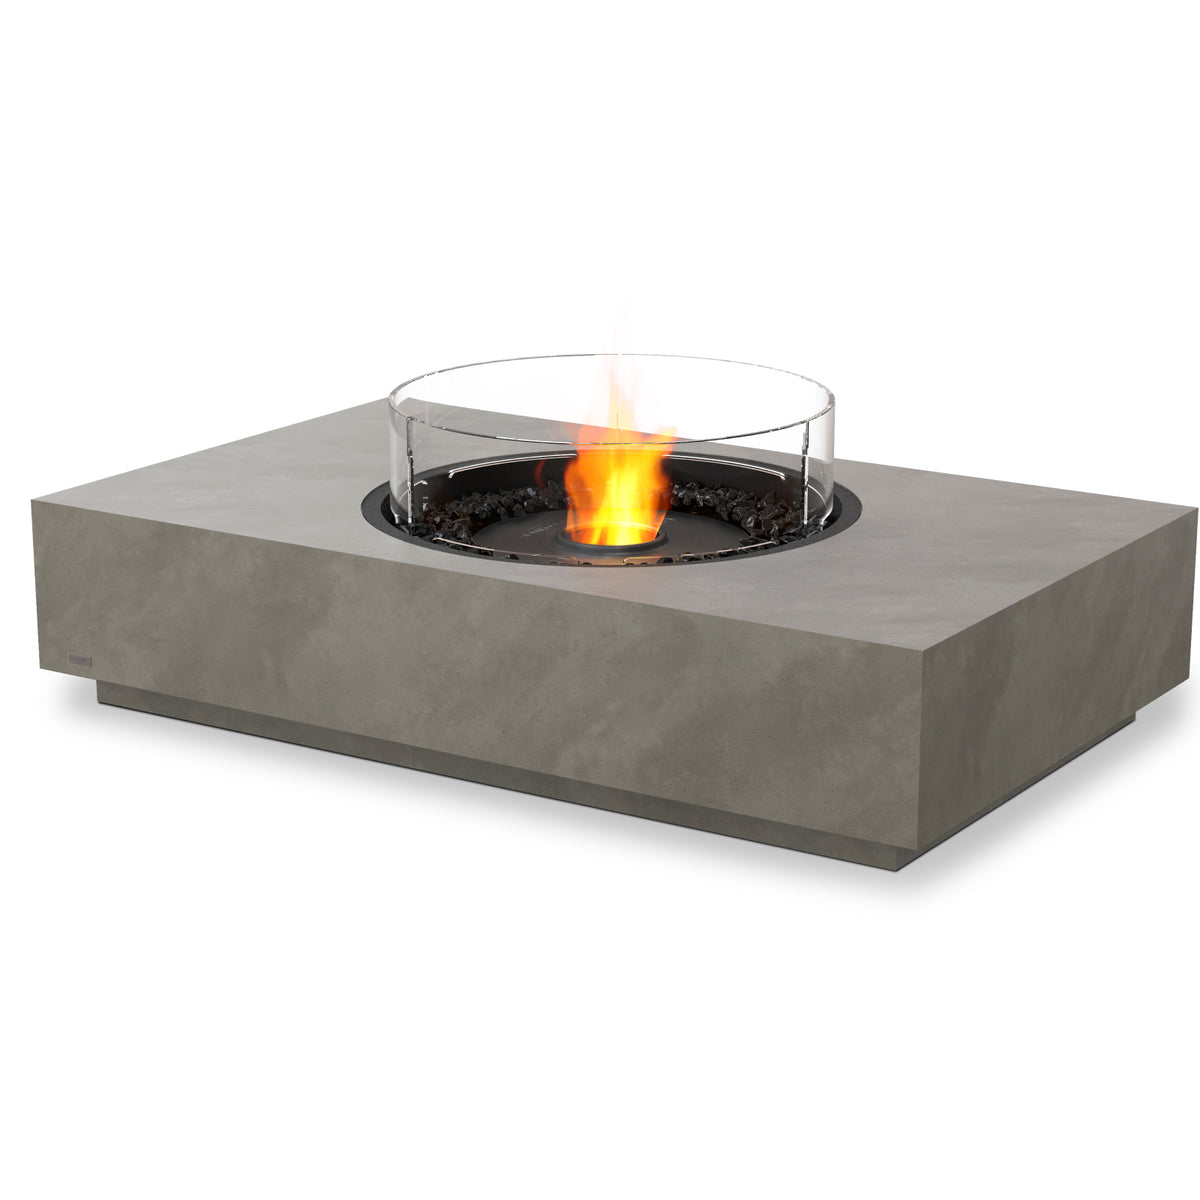 martini 50 ethanol fire pit table natural black